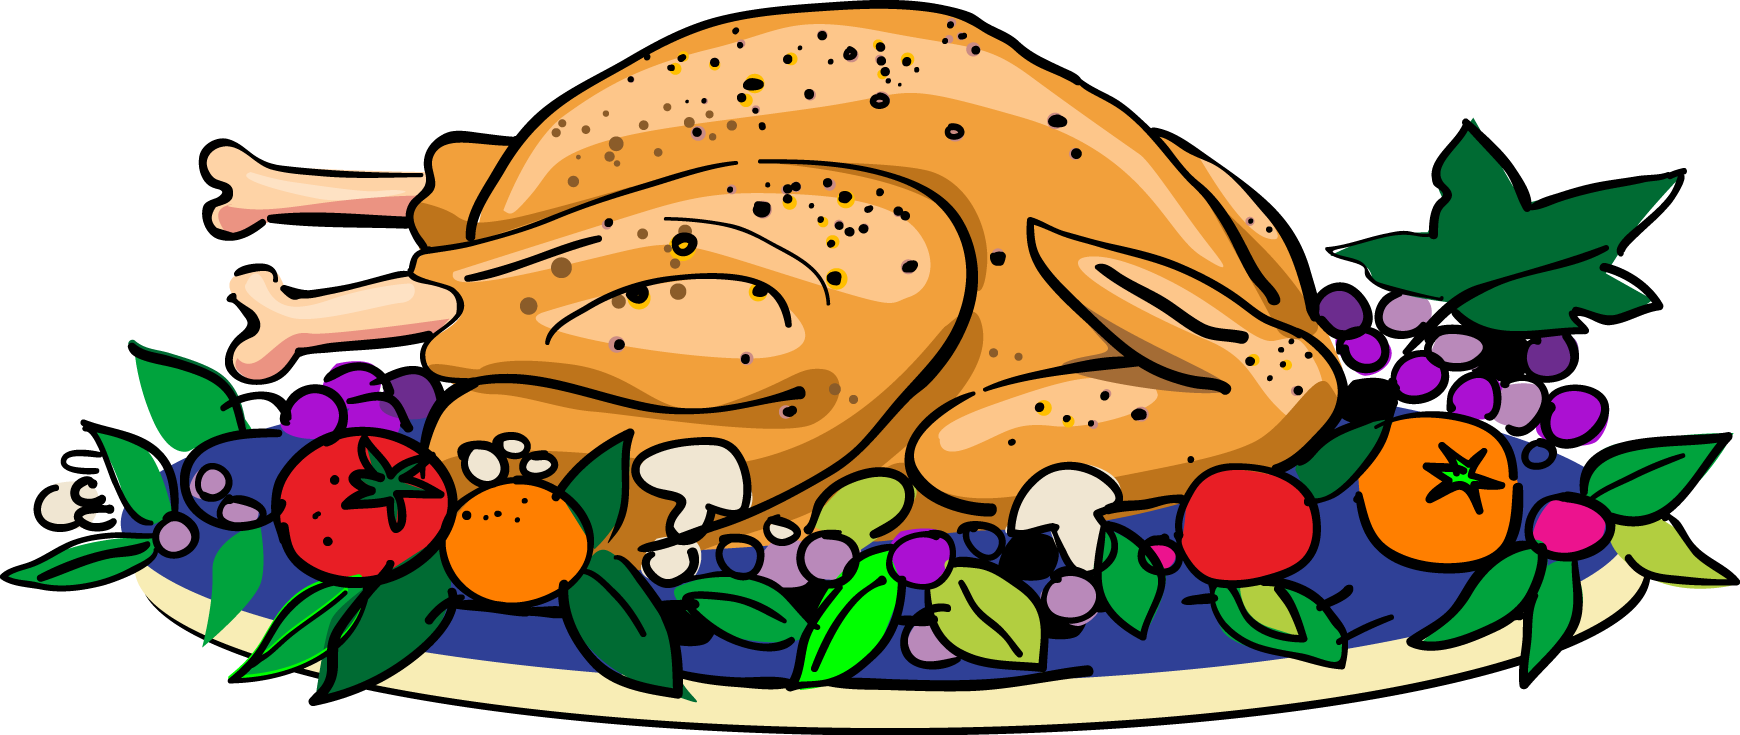 Roasted Turkey | Clipart Panda - Free Clipart Images